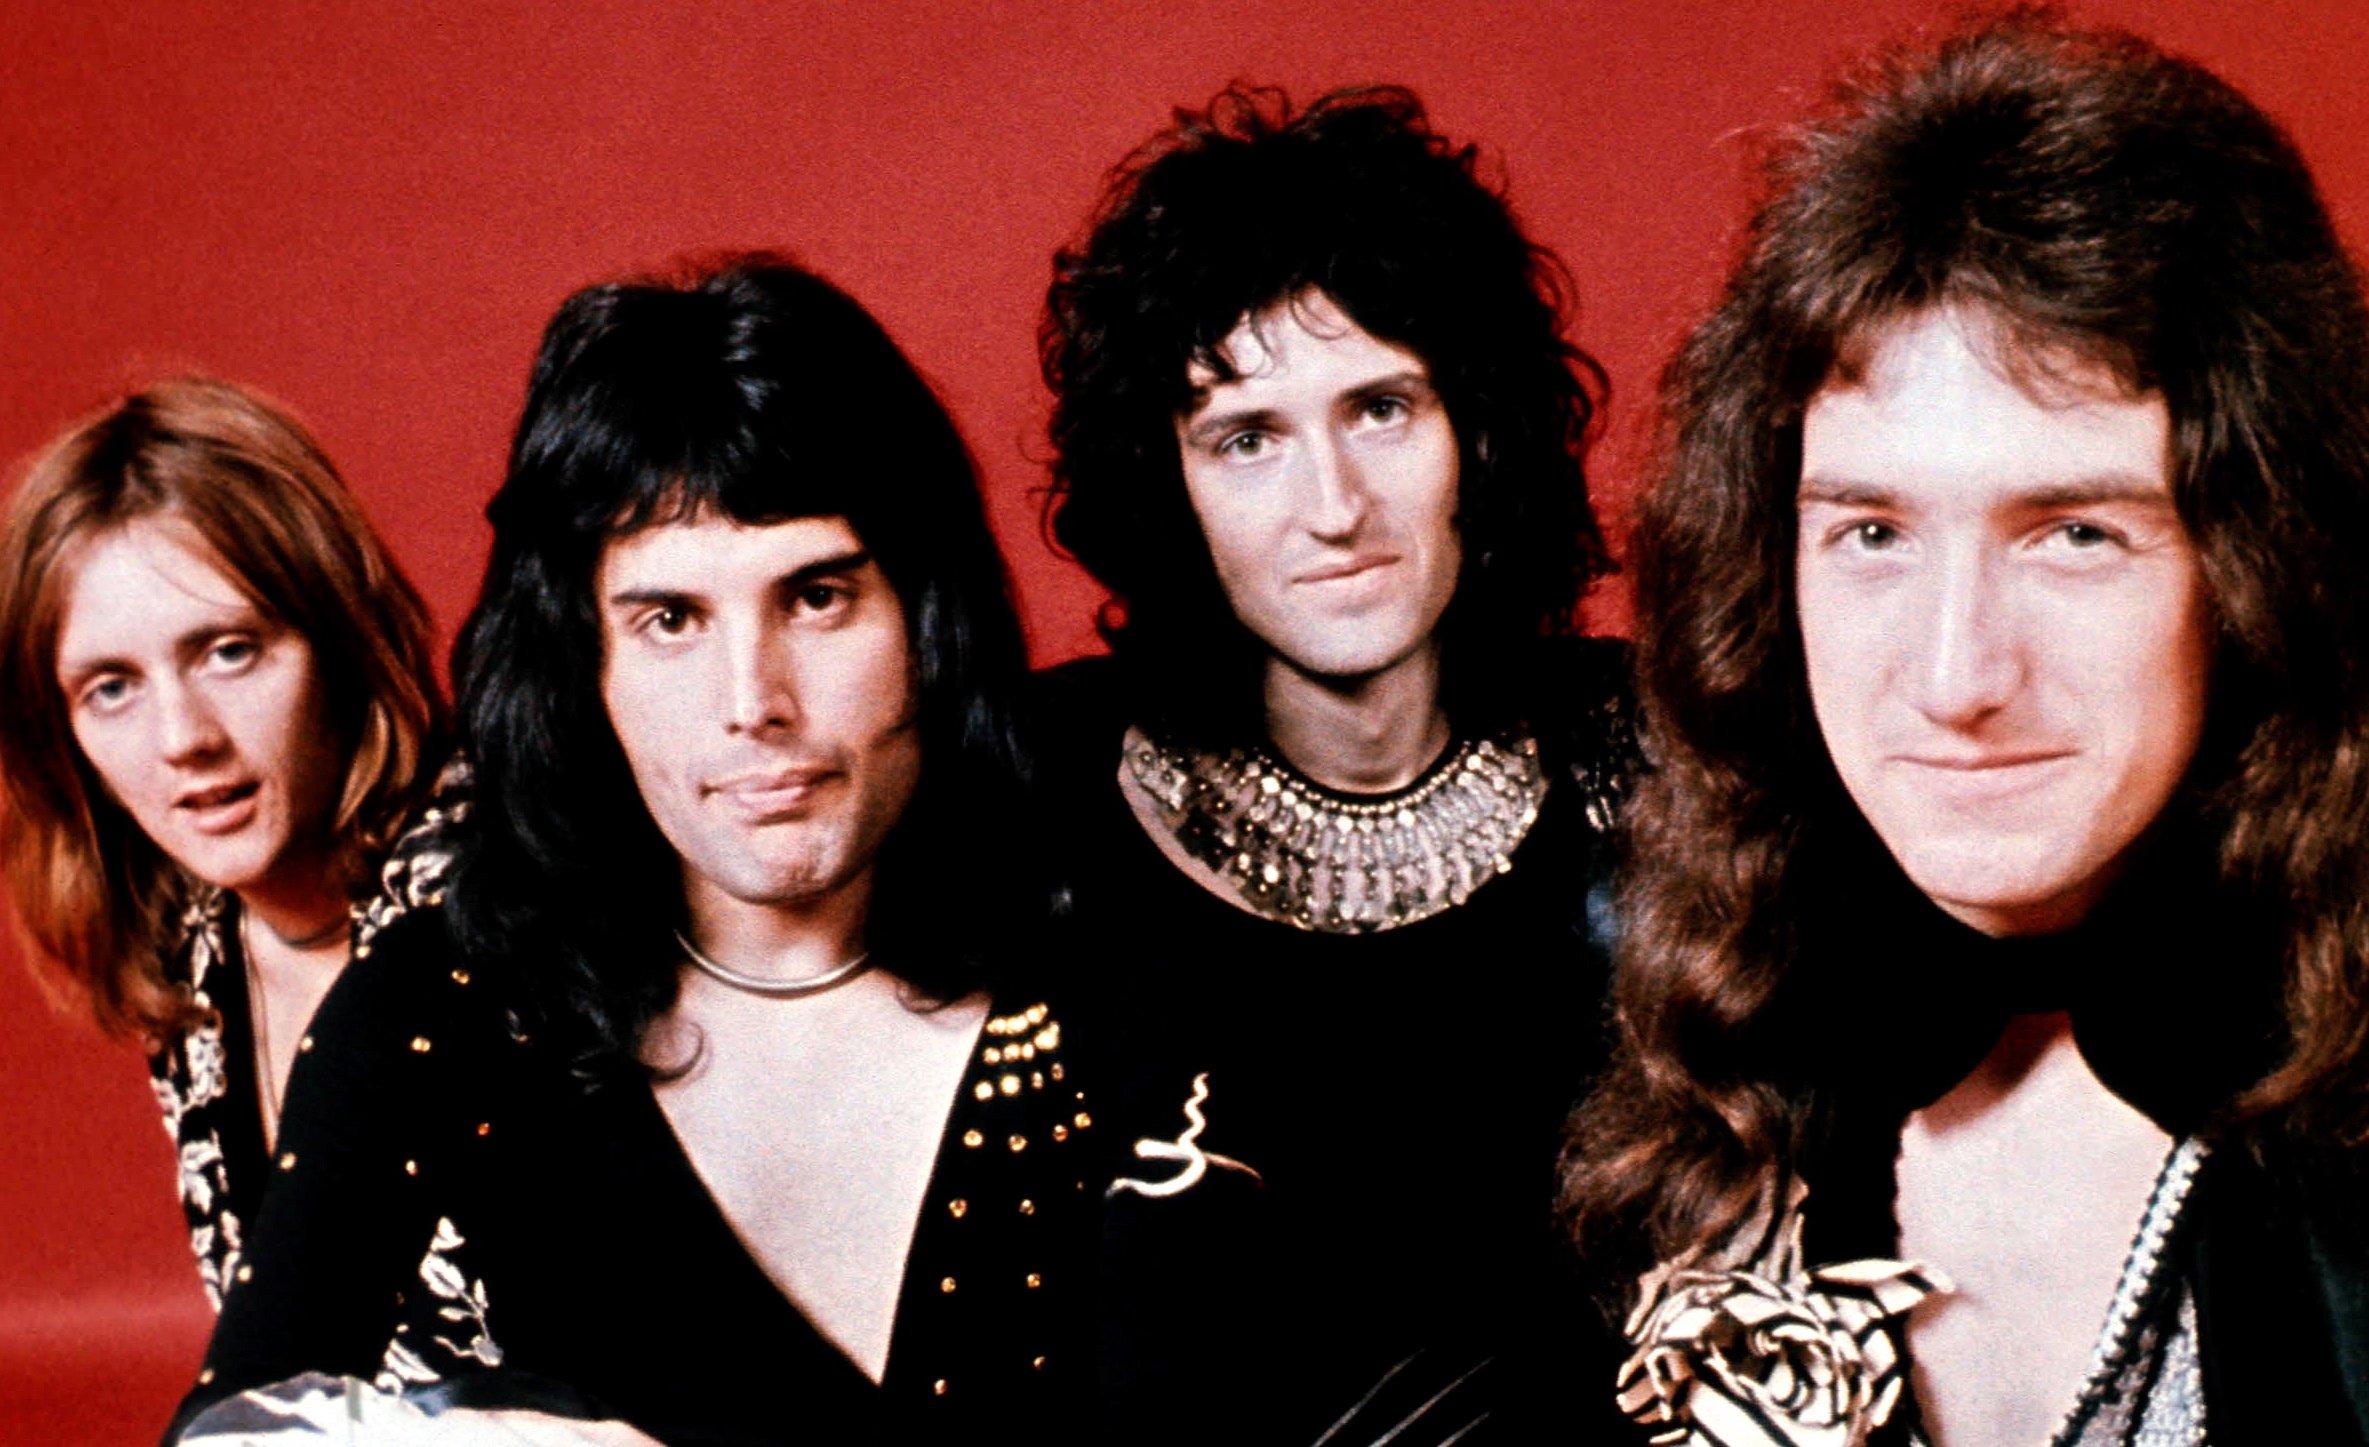 39. lyrics by Brian May, Produced by Queen and Roy